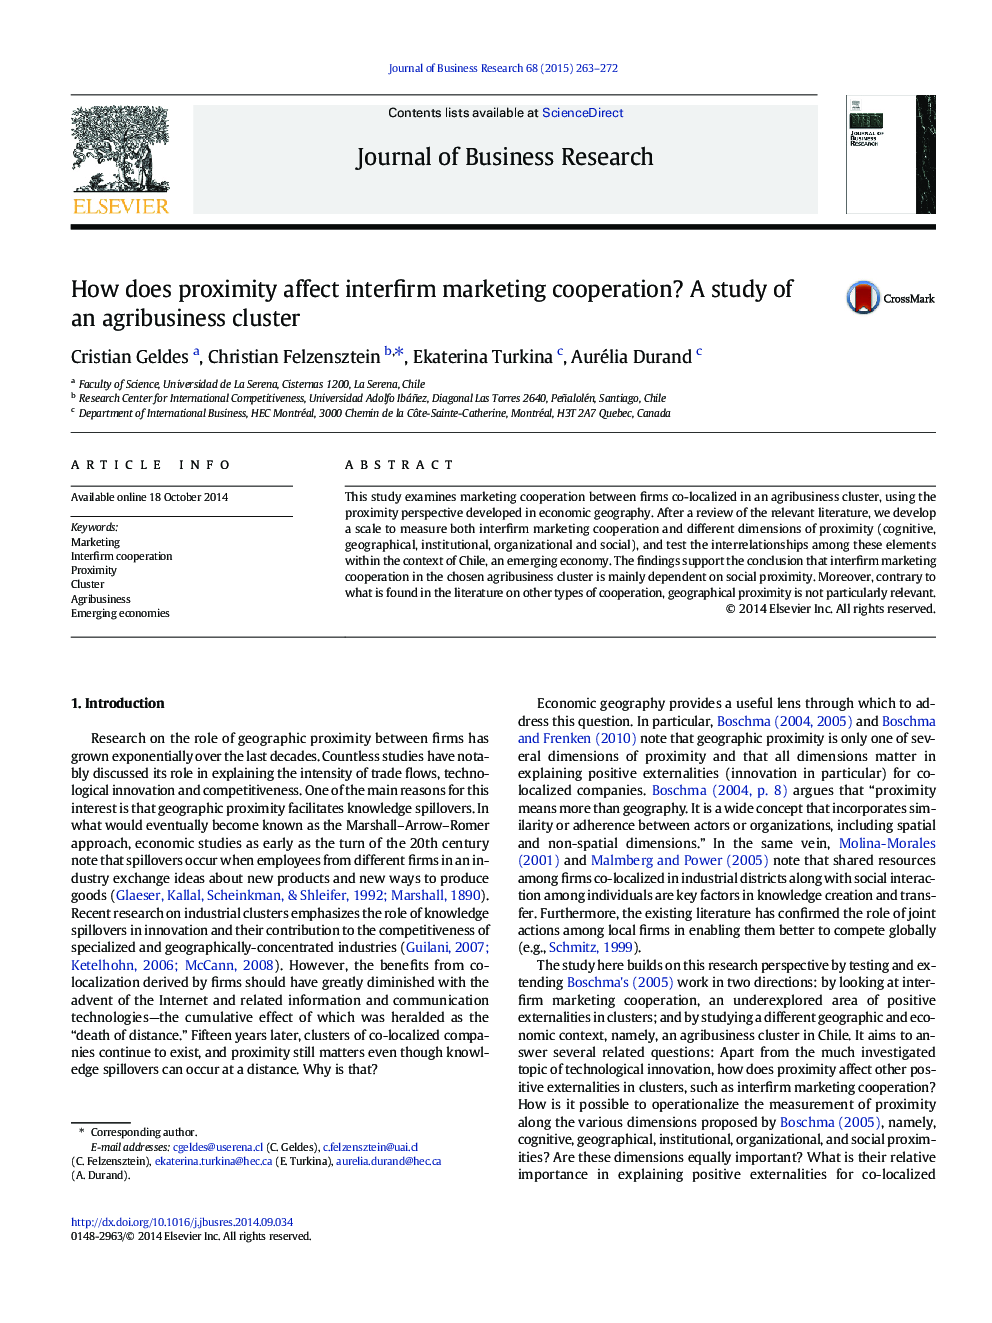 How does proximity affect interfirm marketing cooperation? A study of an agribusiness cluster